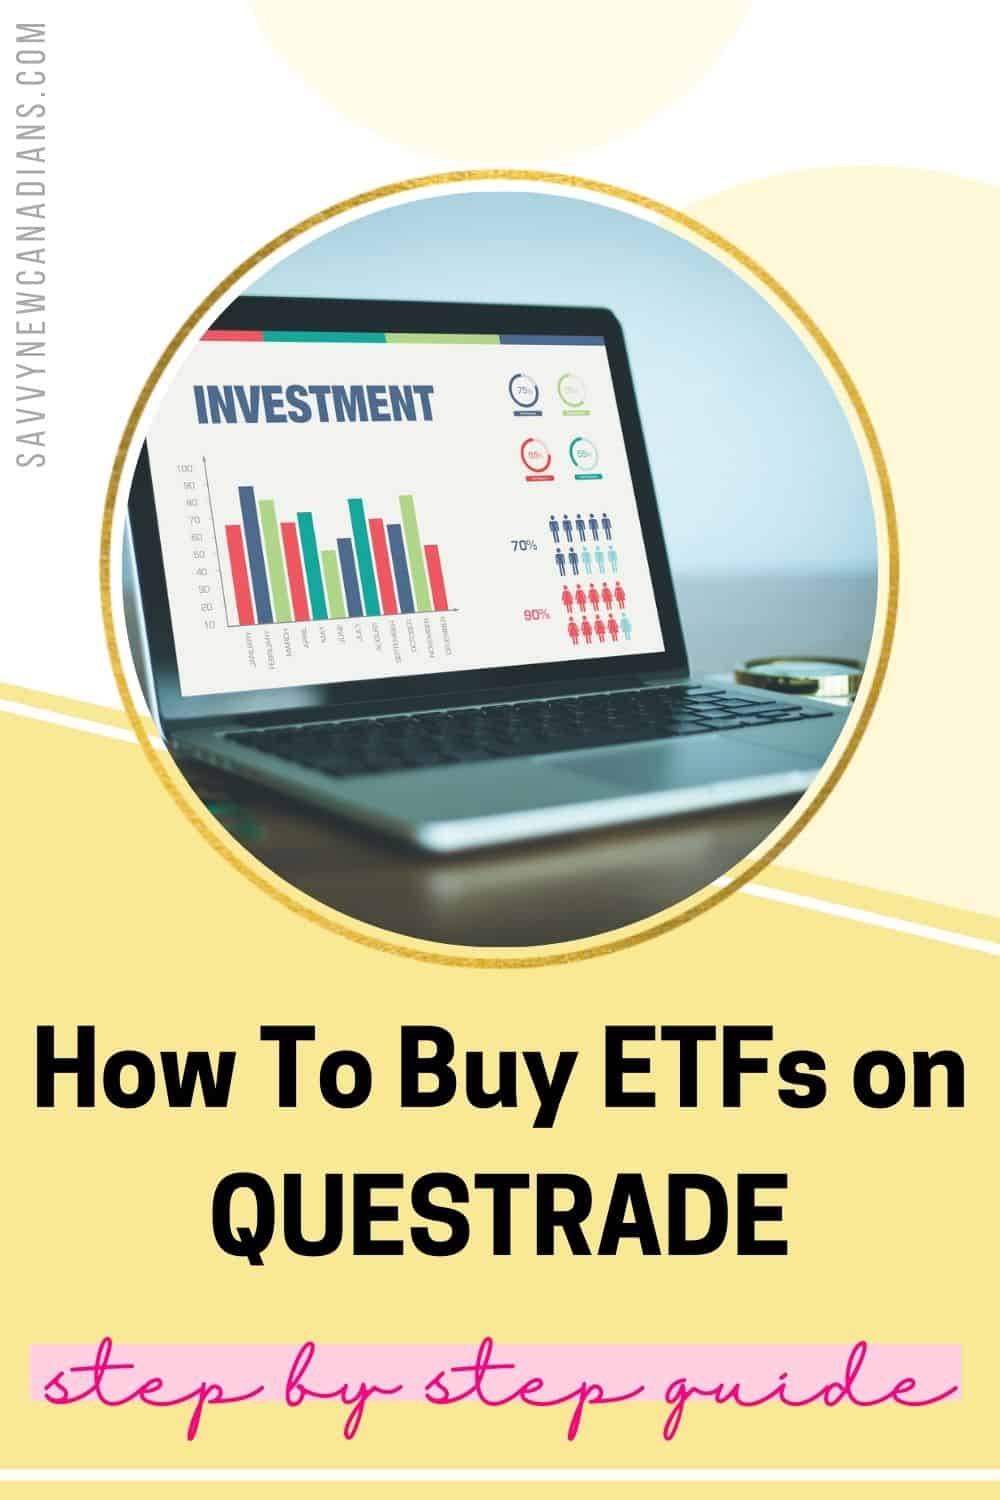 How To Buy ETFs on Questrade 2022 (A Step by Step Guide)